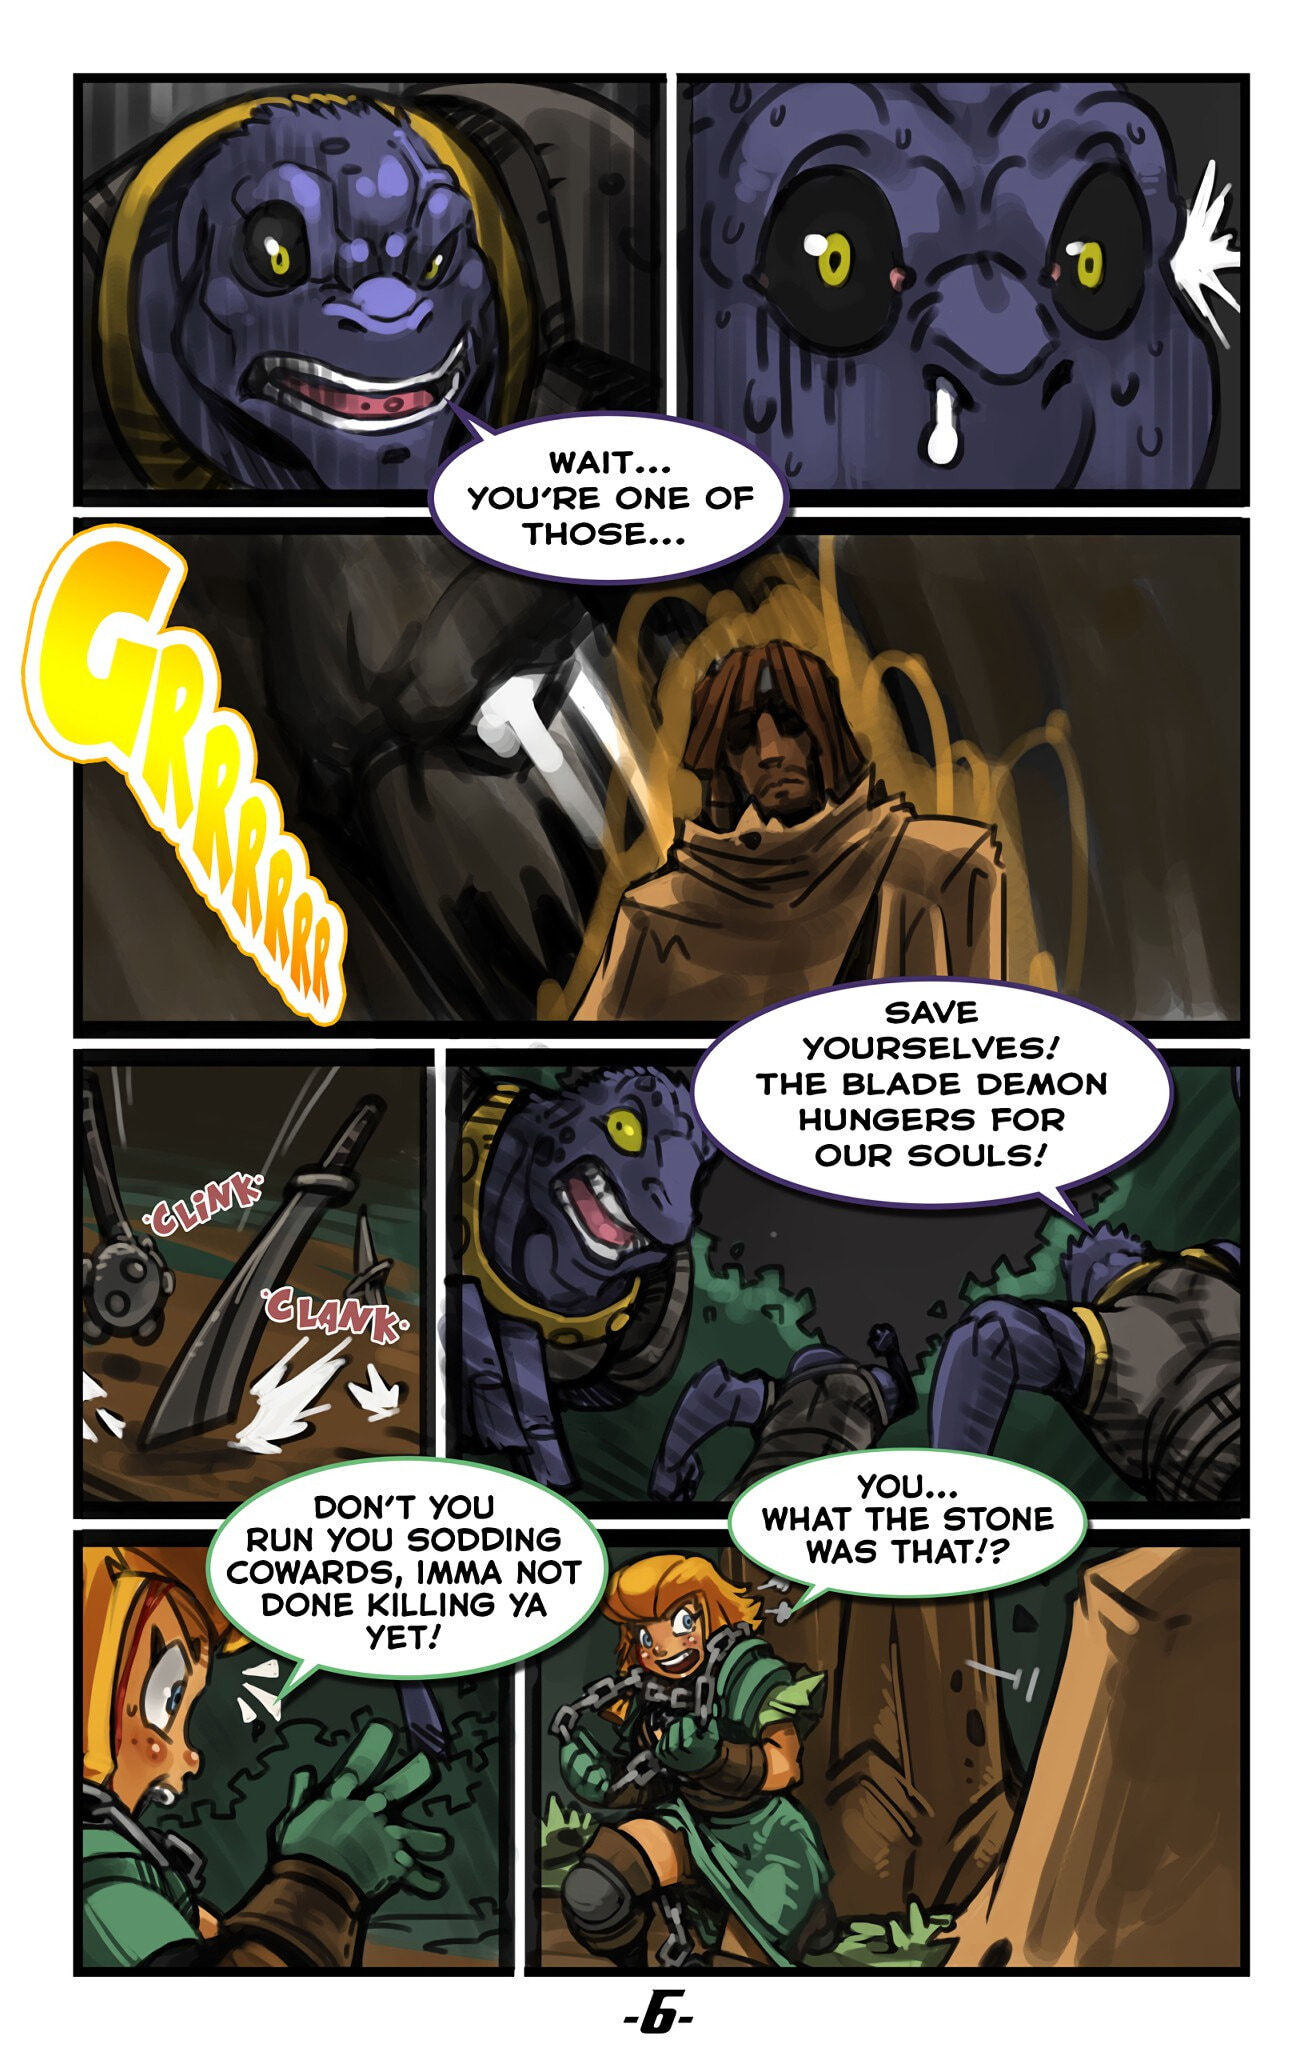 Cheska the Mighty - Page 7